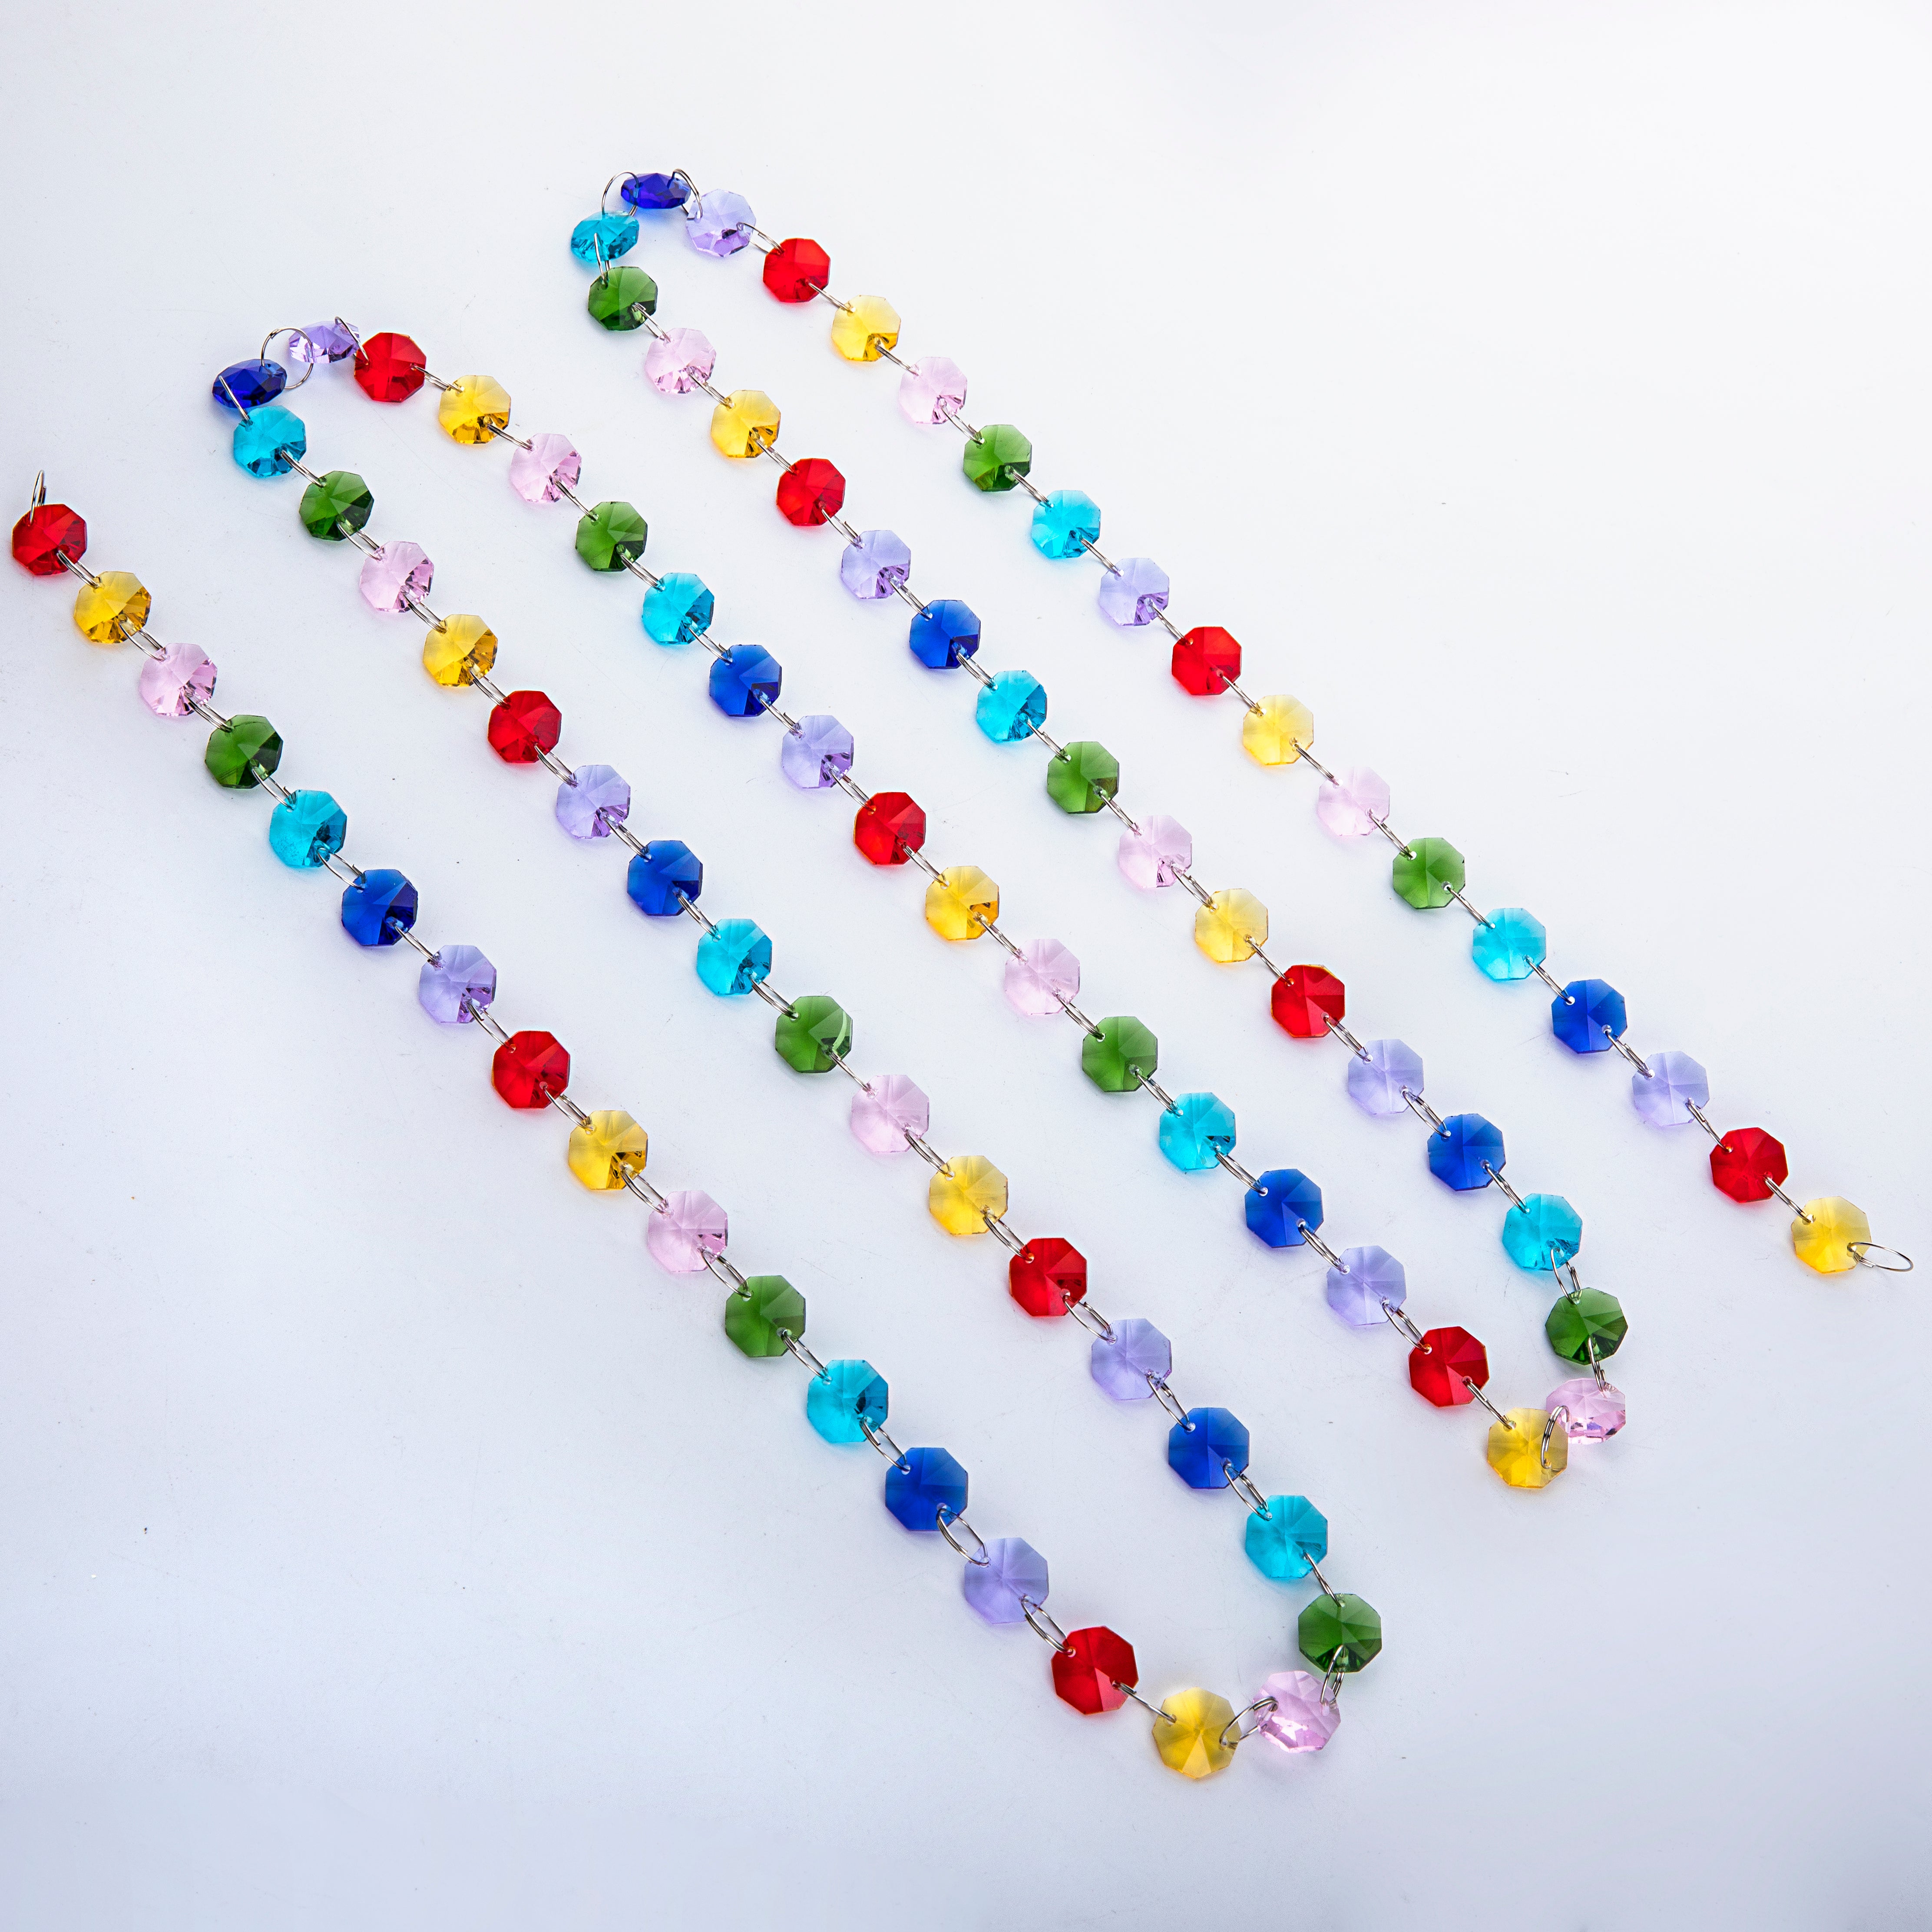 6FT Glass Crystal Rainbow Color 14mm Octagon Beads Chain Chandelier Prisms Hanging Wedding Garland